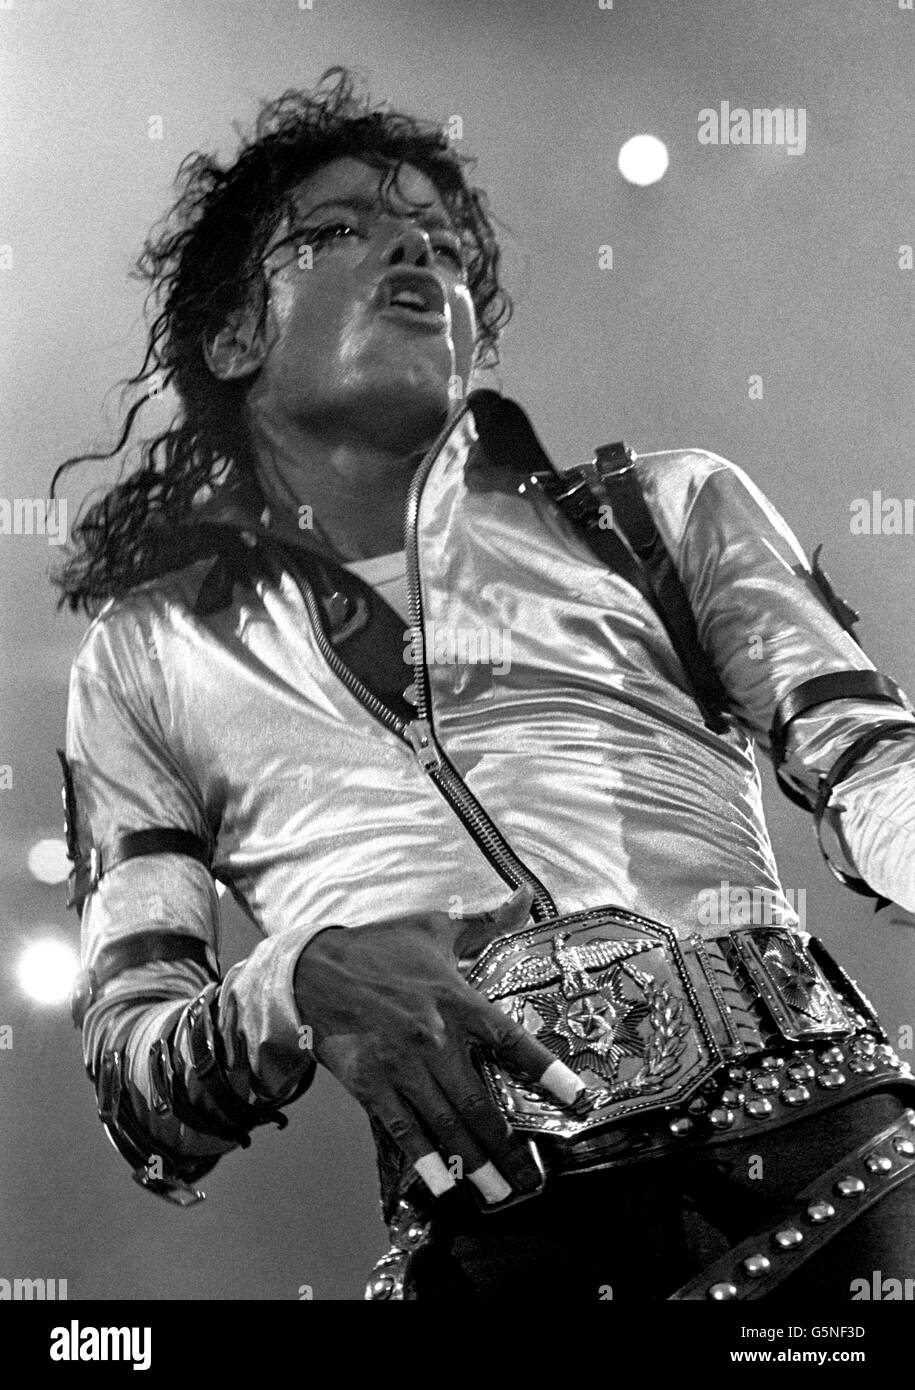 American superstar Michael Jackson rocks Wembley Stadium in London, as he kicks off the British leg of his sell-out world tour. Stock Photo